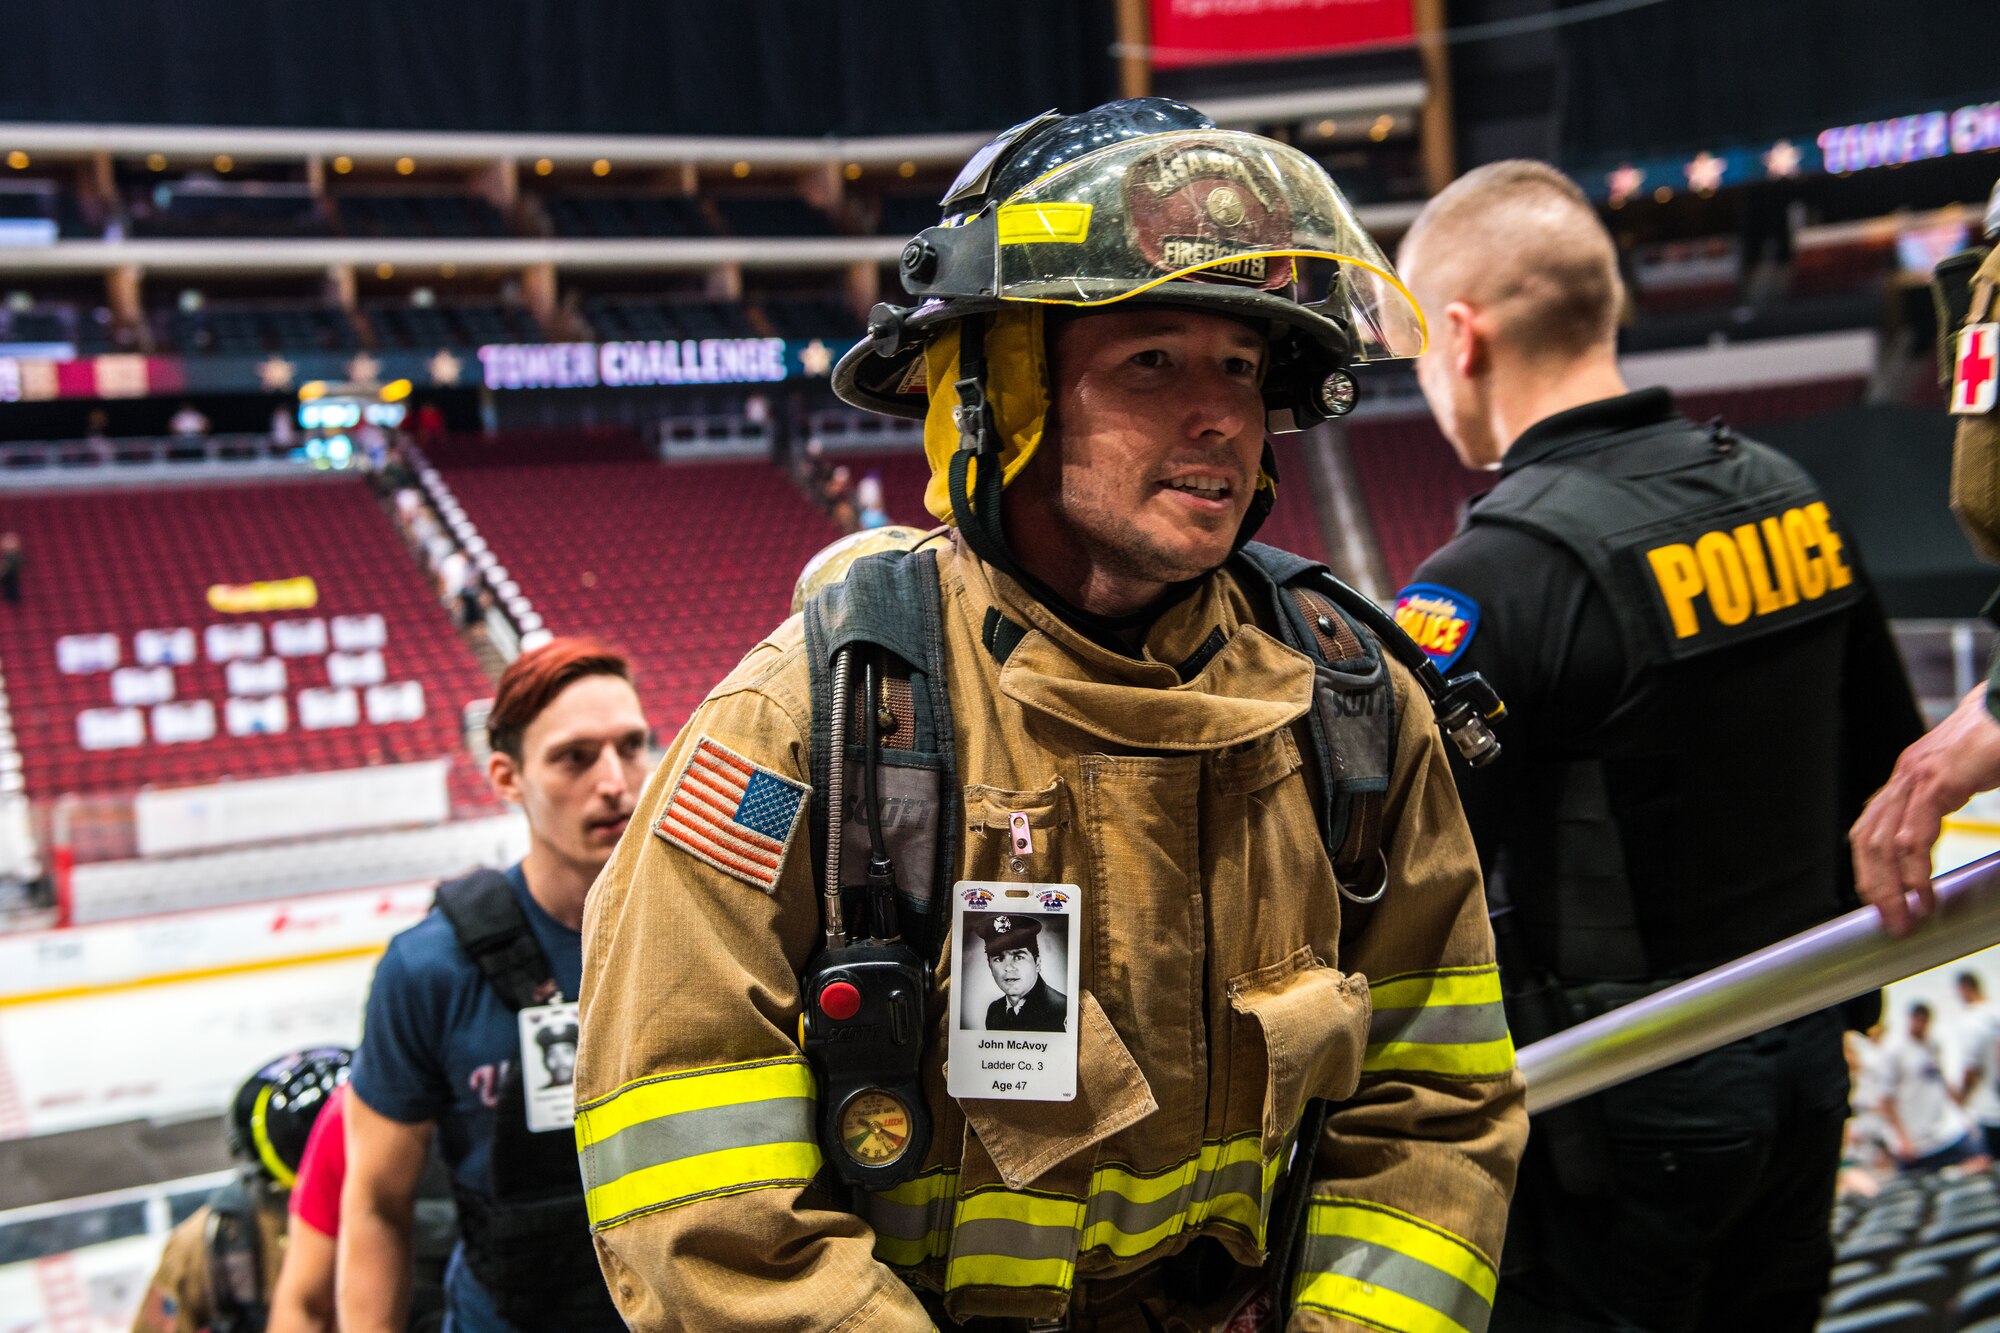 A firefighter from the Casa Grande Fire Department climbs stairs during the 9/11 Tower Challenge Sept. 11, 2019, at the Gila River Arena, Glendale, Ariz.